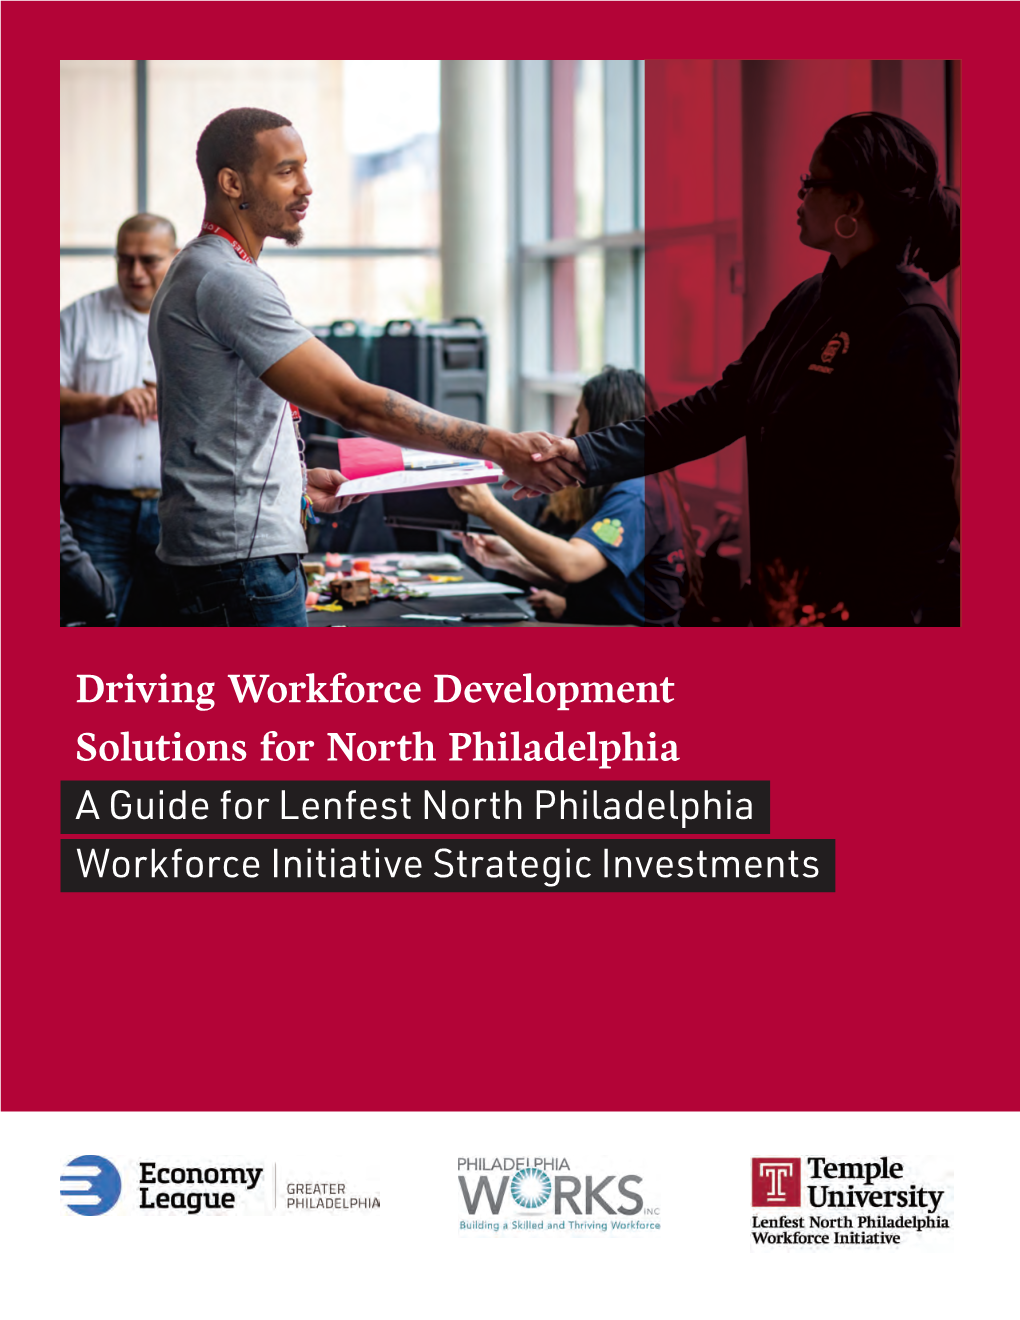 A Guide for Lenfest North Philadelphia Workforce Initiative Strategic Investments Contents